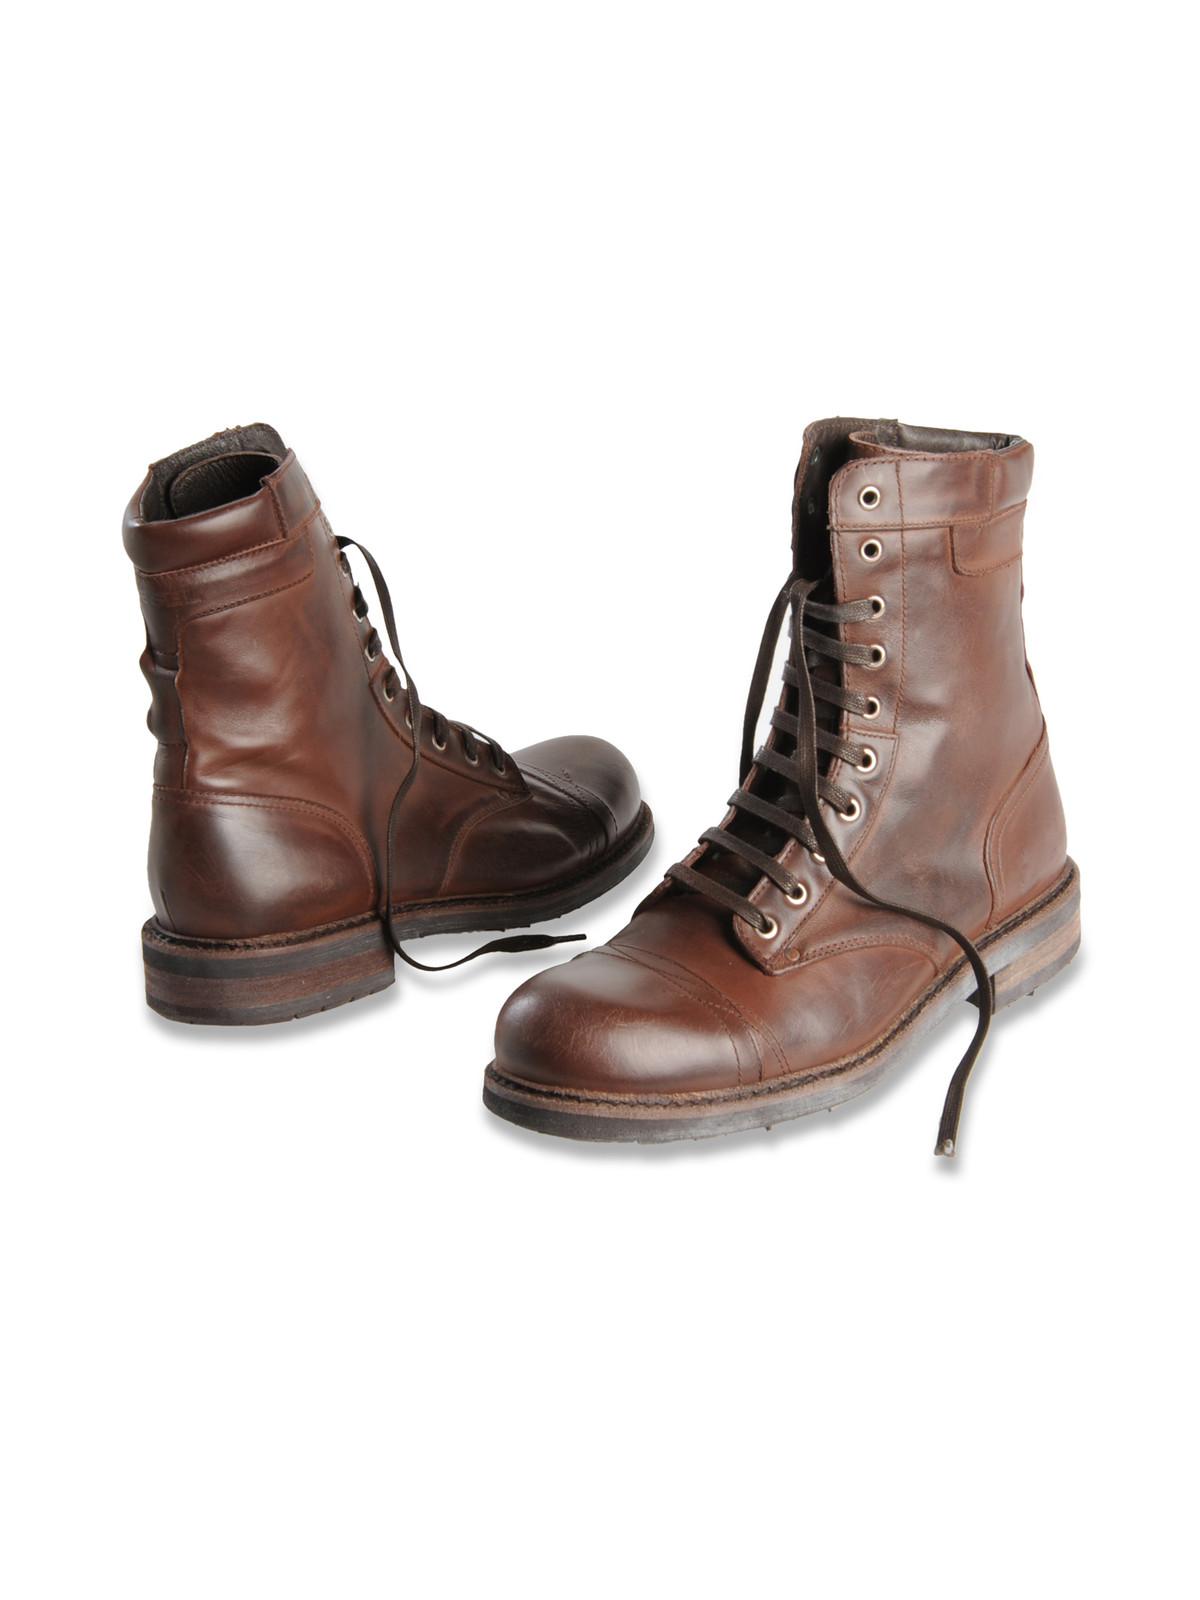 DIESEL Butch & Cassidy Boots in Brown for Men | Lyst